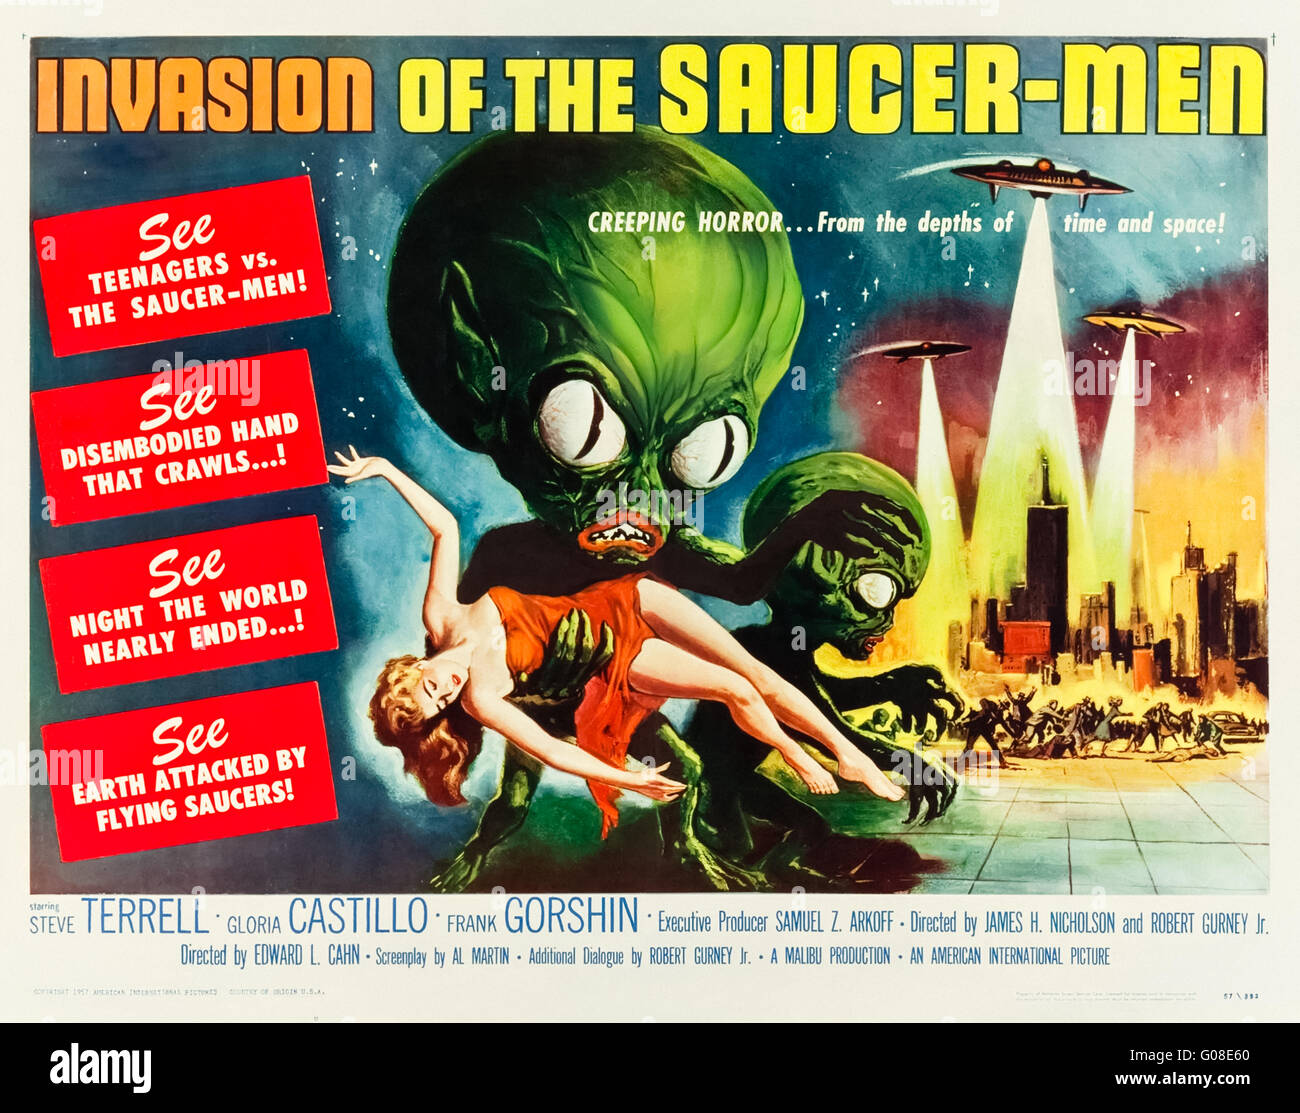 Invasion of the Saucer-Men (1957) directed by Edward L. Cahn and starring Steven Terrell, Gloria Castillo and Frank Gorshin. Aliens go on the rampage after one of their number is runover. Photograph of original fully restored linen backed US half sheet poster featuring artwork by Albert Kallis. ***EDITORIAL USE ONLY*** Credit: BFA / American International Pictures Stock Photo